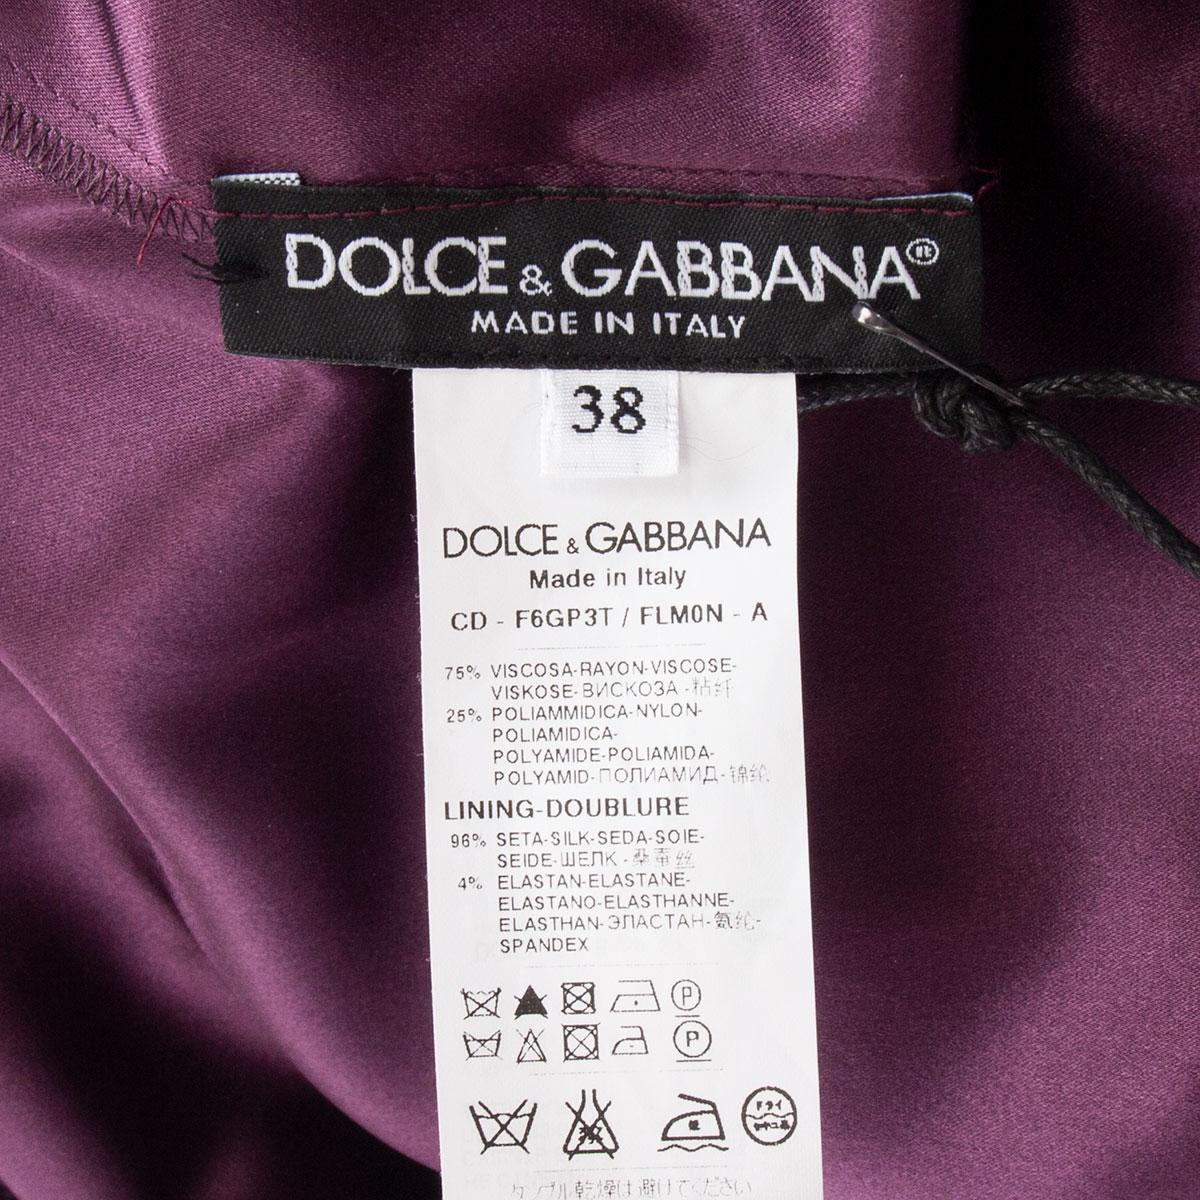 DOLCE & GABBANA eggplant LACE Short Sleeve Shift Dress 38 XS In Excellent Condition For Sale In Zürich, CH